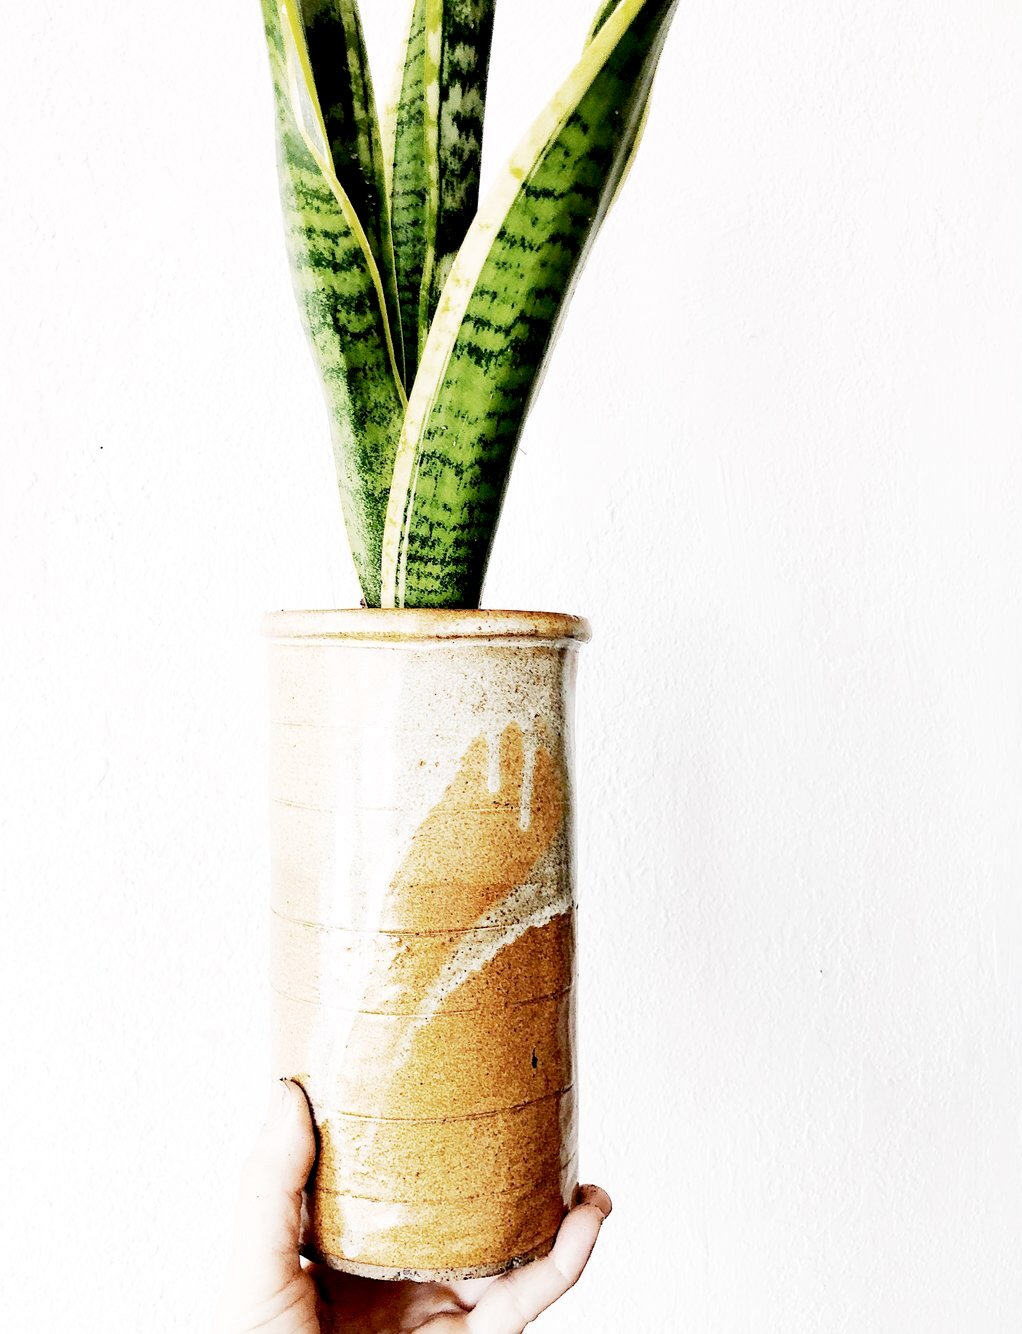 Handmade Ceramic Planter with or without Plant